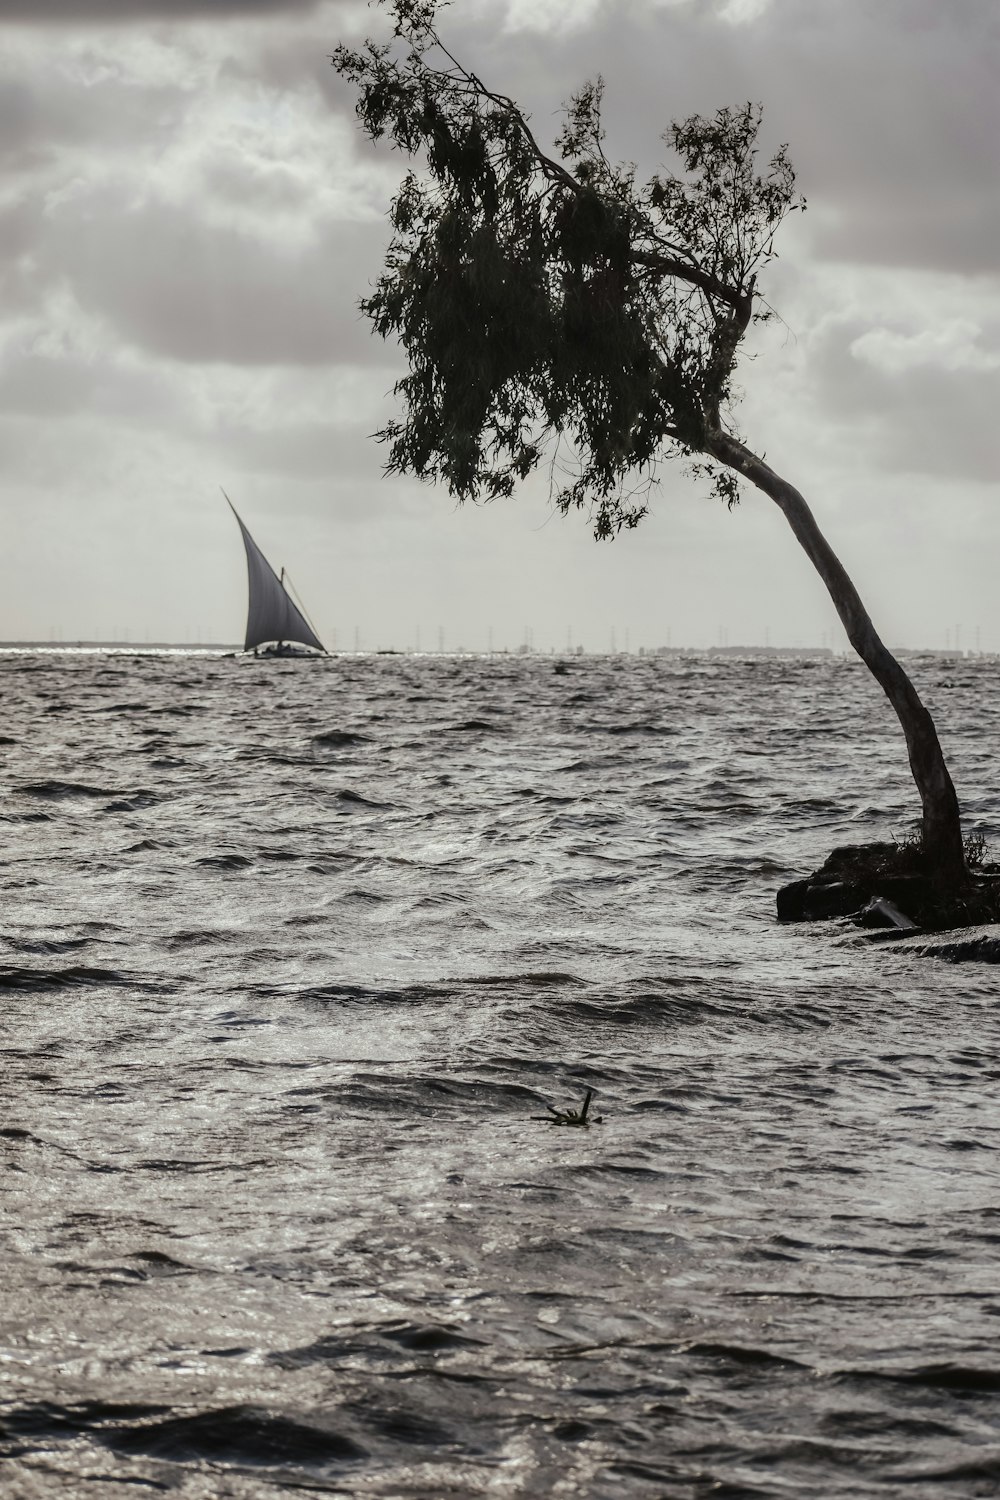 a lone sailboat in the ocean near a tree